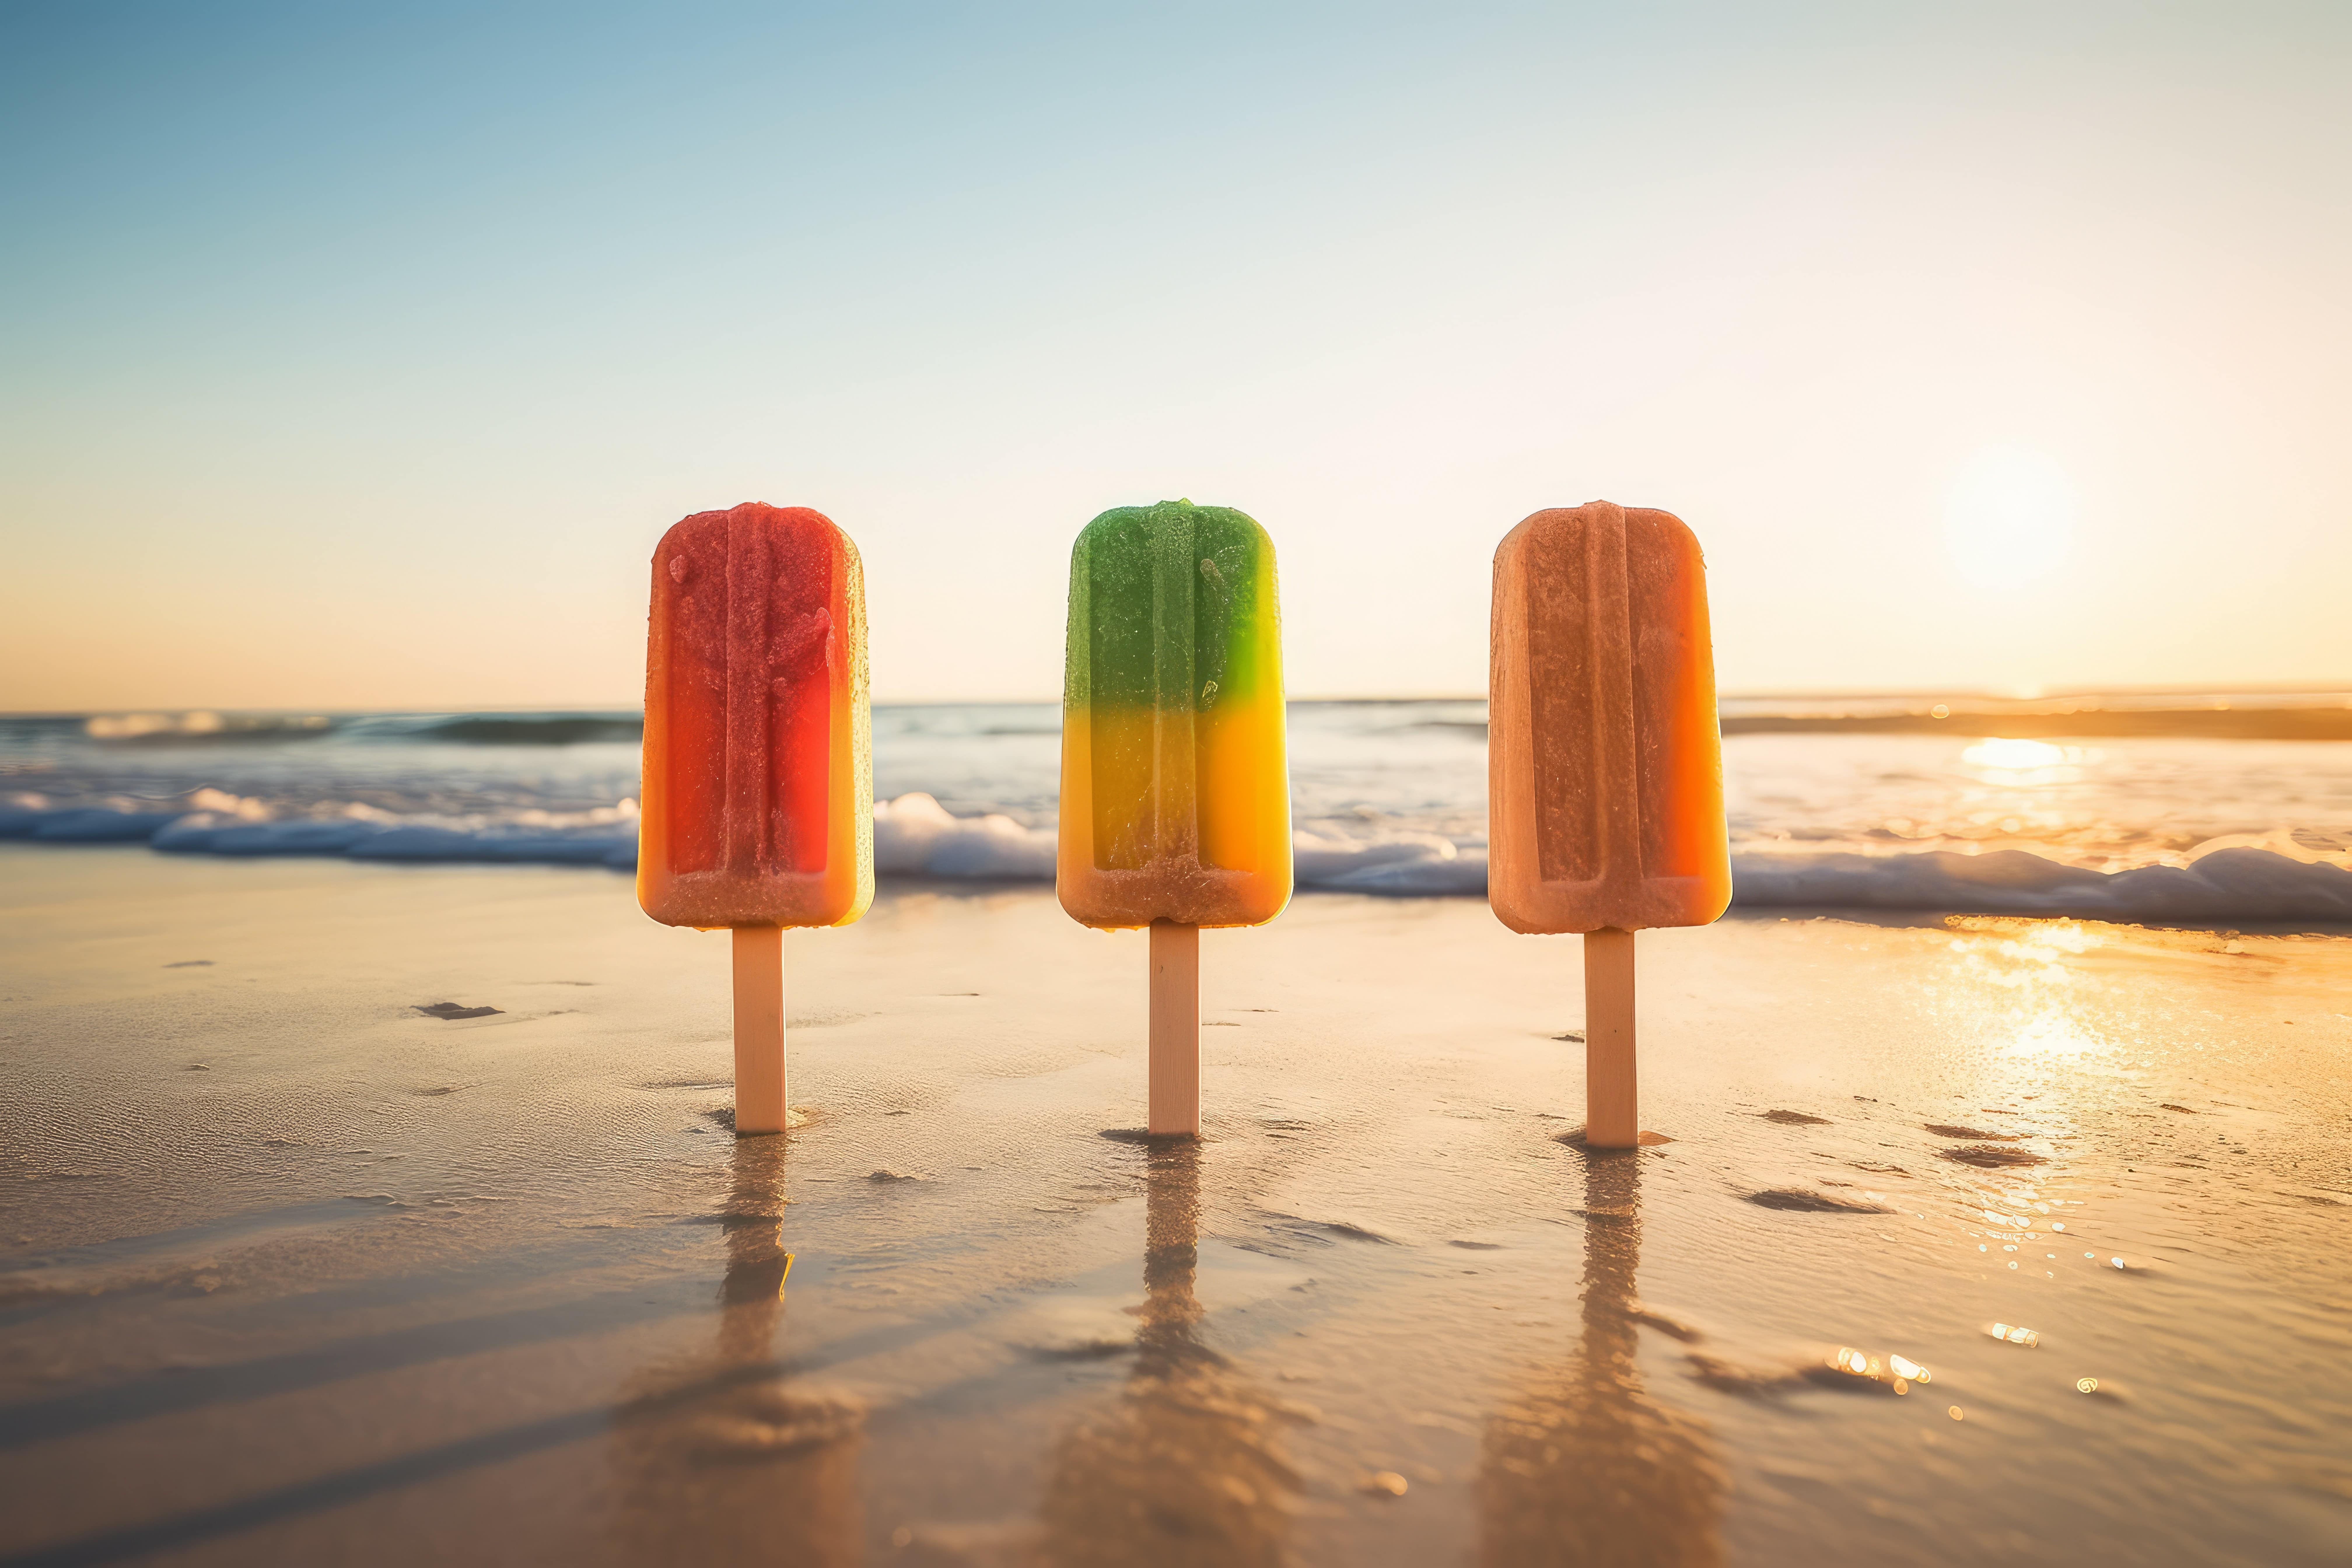 Three ice lollies standing upright in the sand with a background of the sea and a blue sky as the sun sets